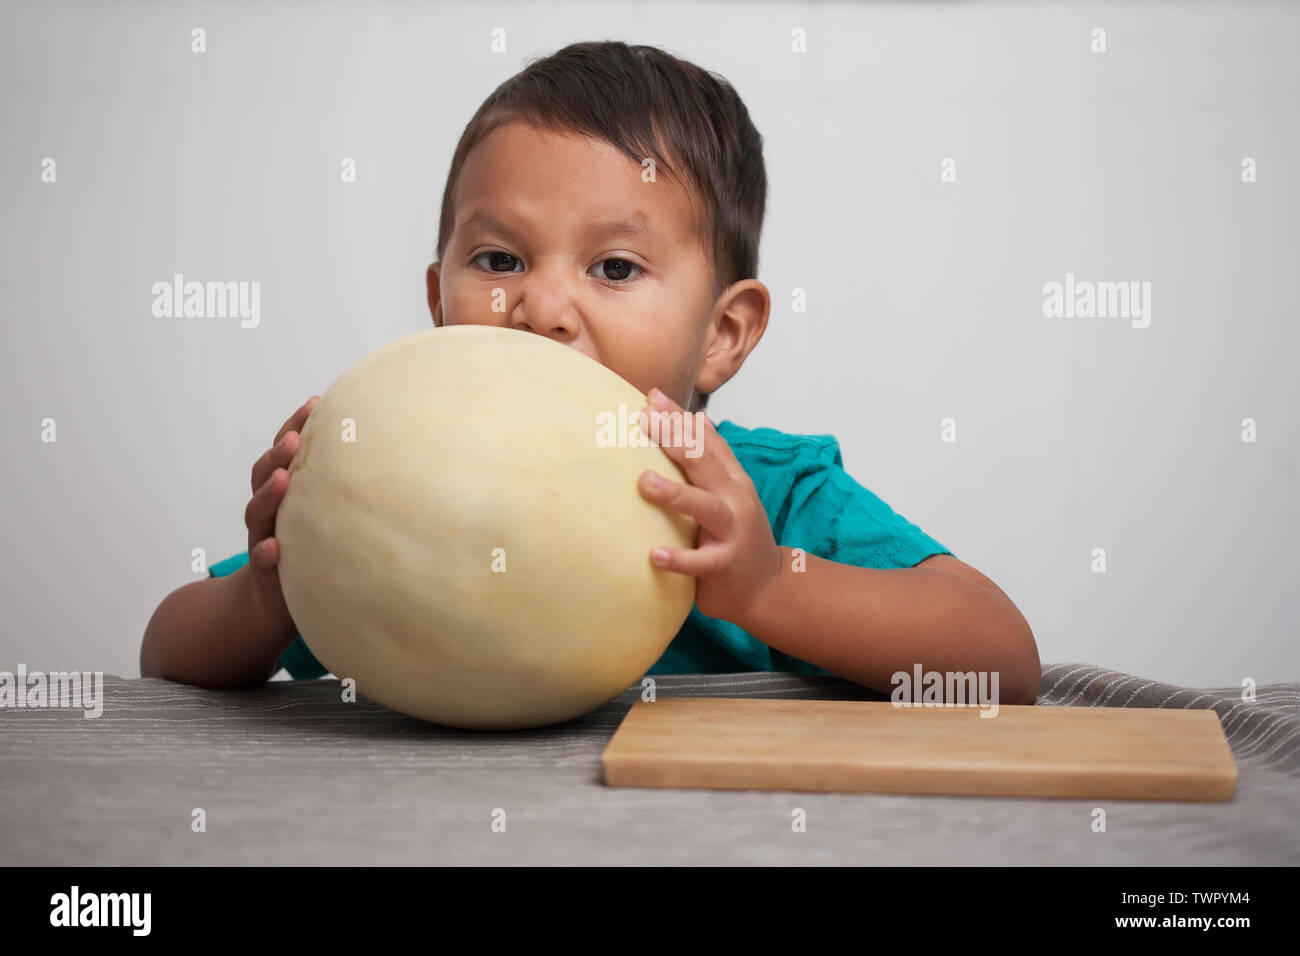 An impatient toddler trying hard to take a bite out of a honeymelon he is holding in his grasp before being served. Stock Photo